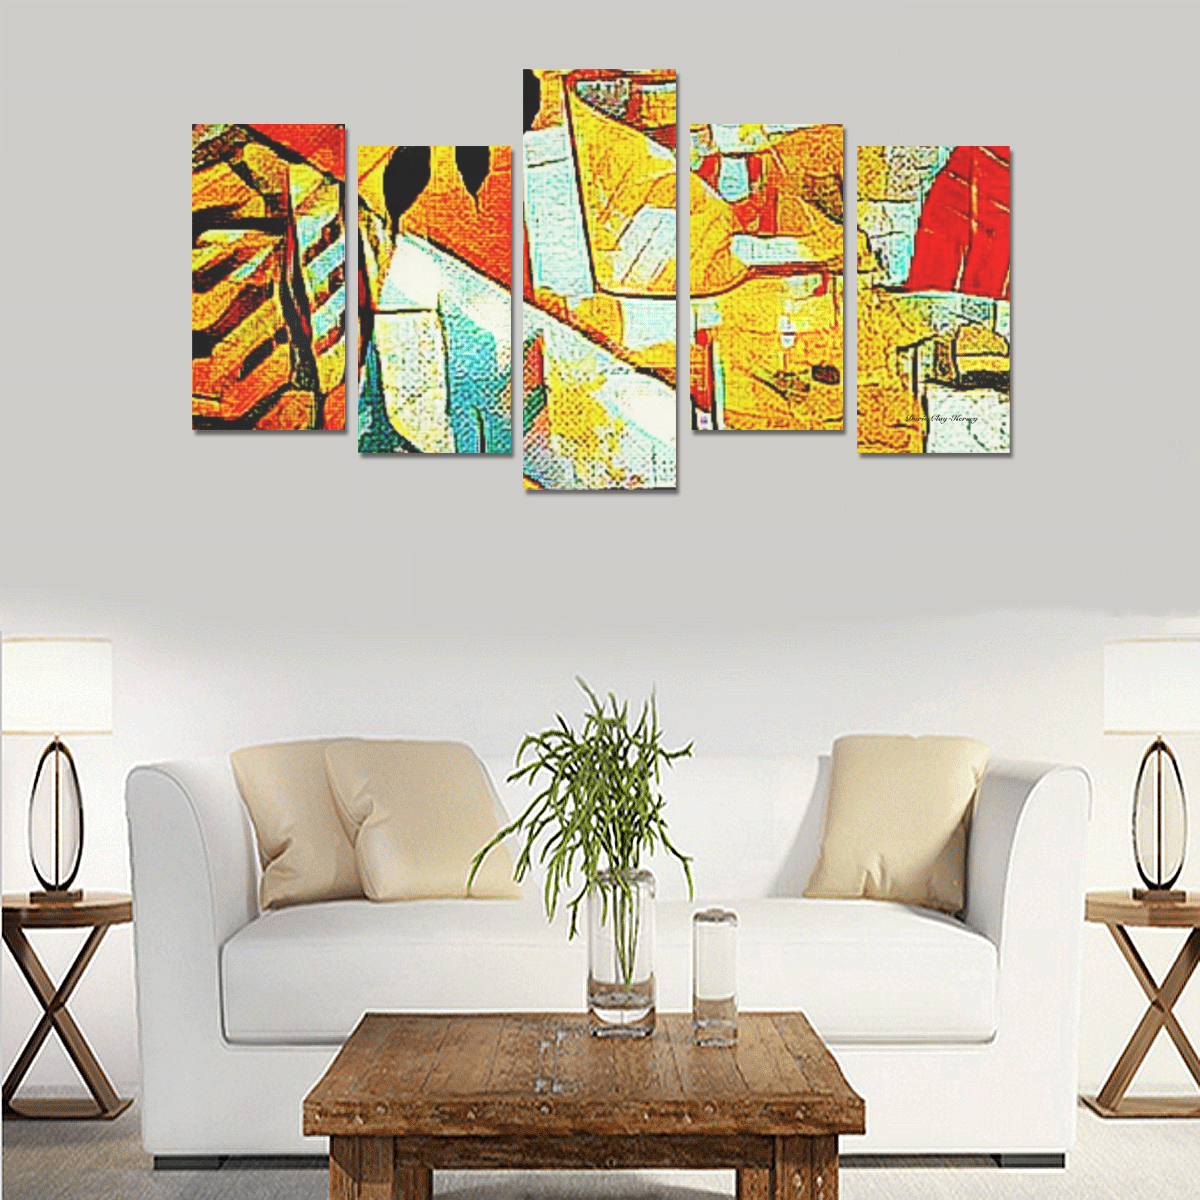 Abstract Art Winds of Leaves By Doris Clay-Kersey Canvas Print Sets E (No Frame)